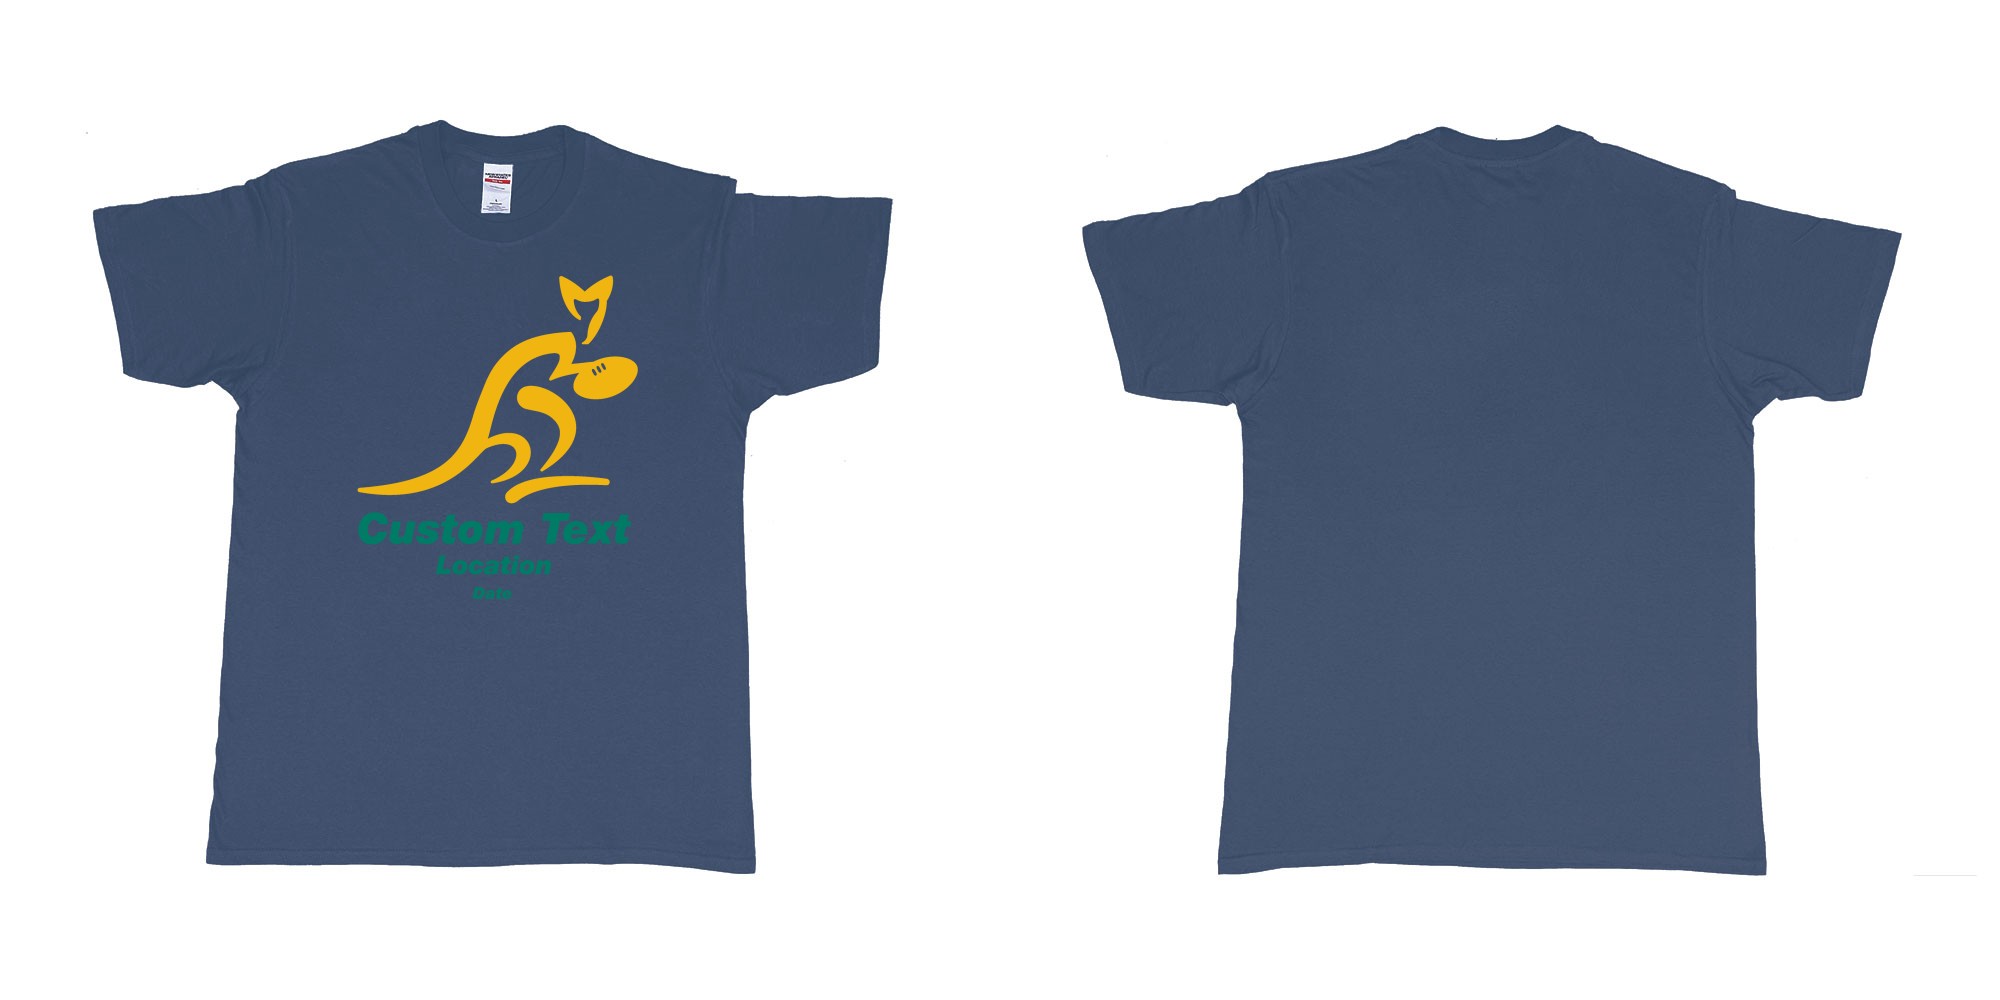 Custom tshirt design australia national rugby union team the wallabies in fabric color navy choice your own text made in Bali by The Pirate Way